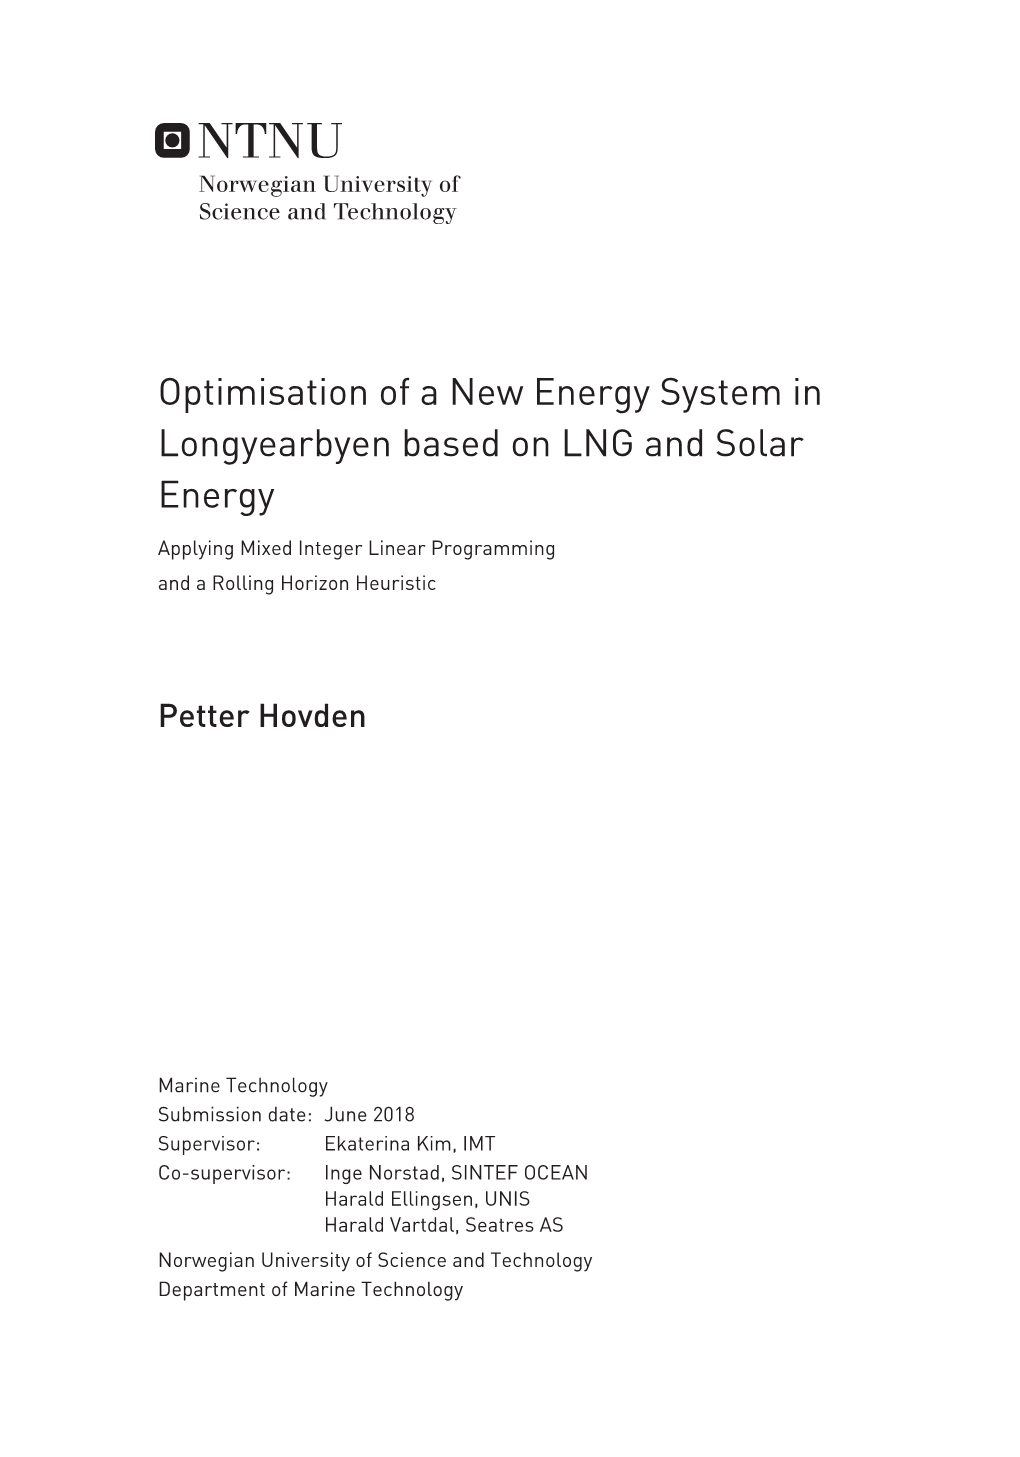 Optimisation of a New Energy System in Longyearbyen Based on LNG and Solar Energy